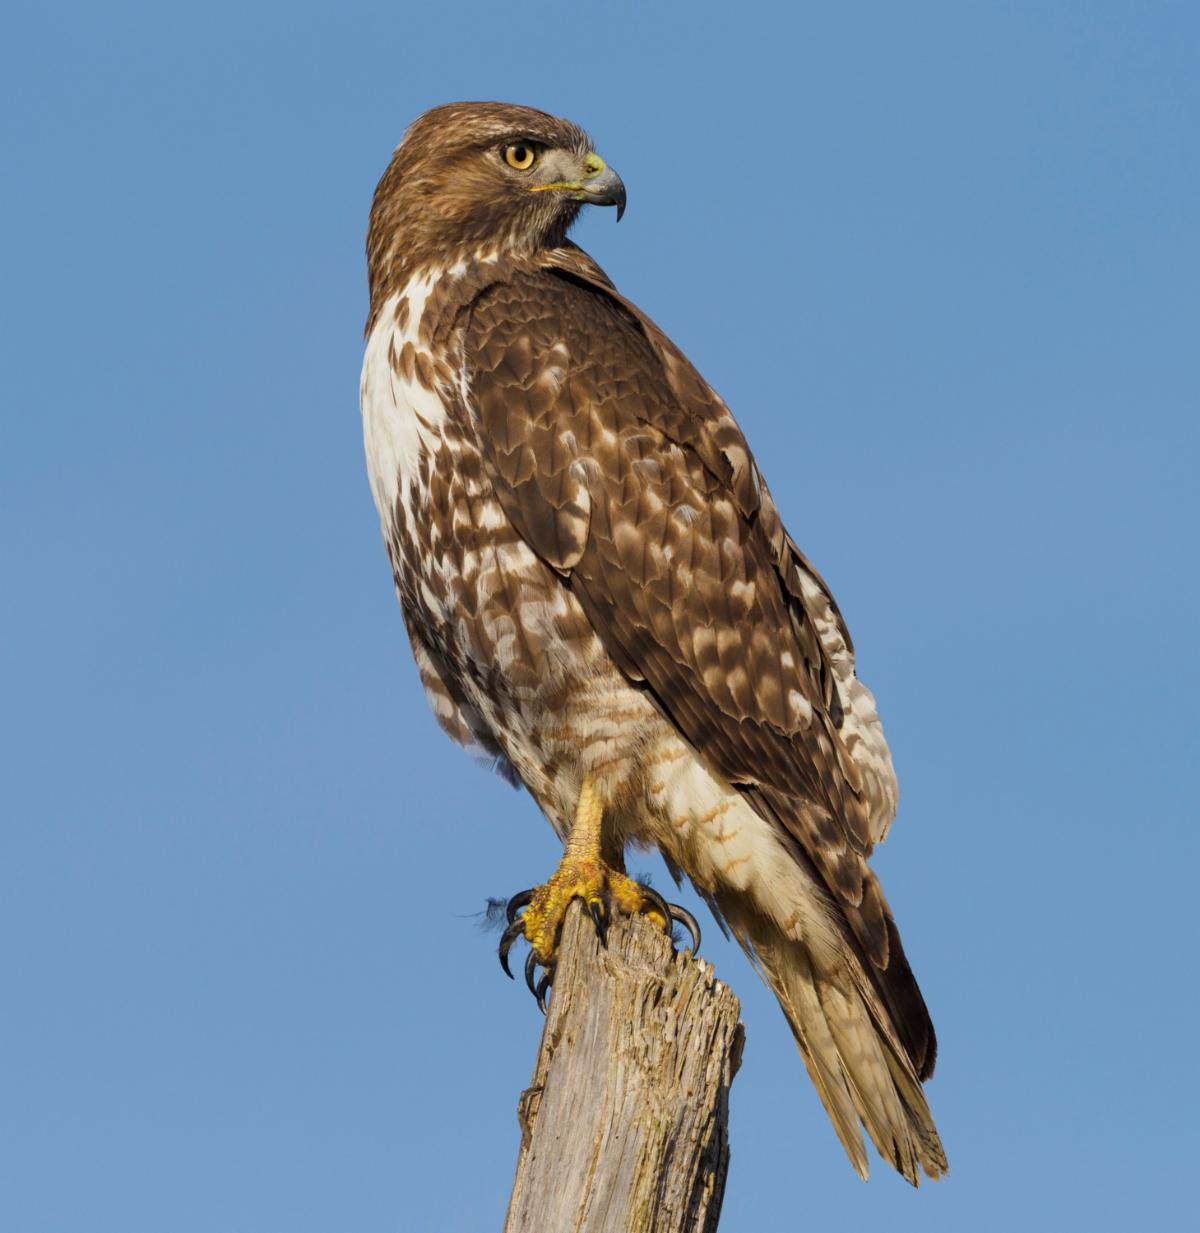 Red Hawk perched on a branch.